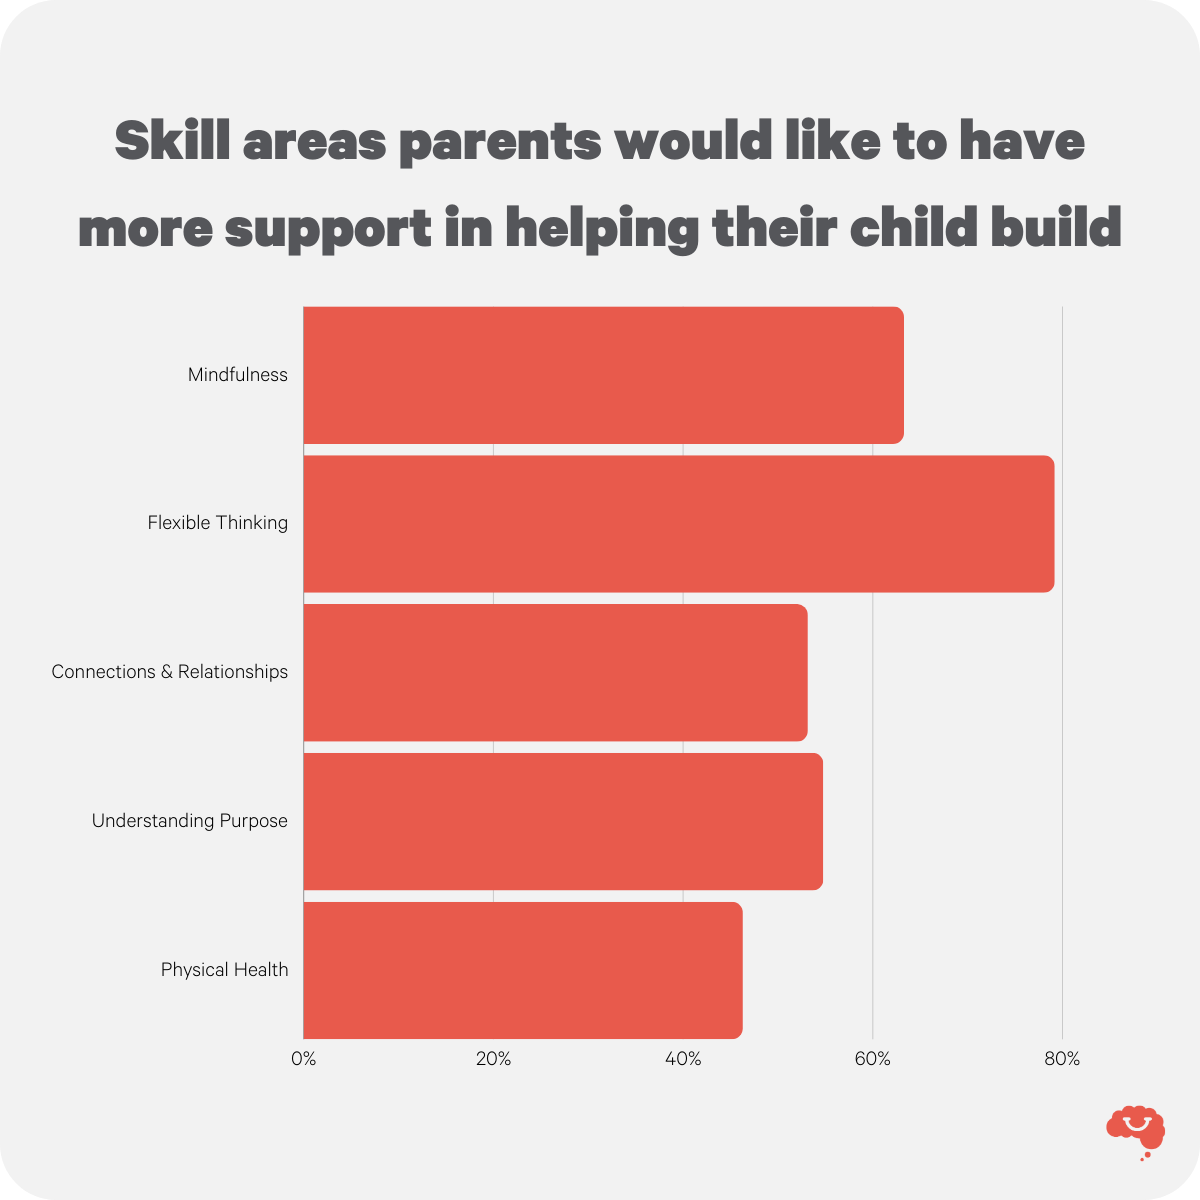 Skill areas parents would like to have more support in helping their child build